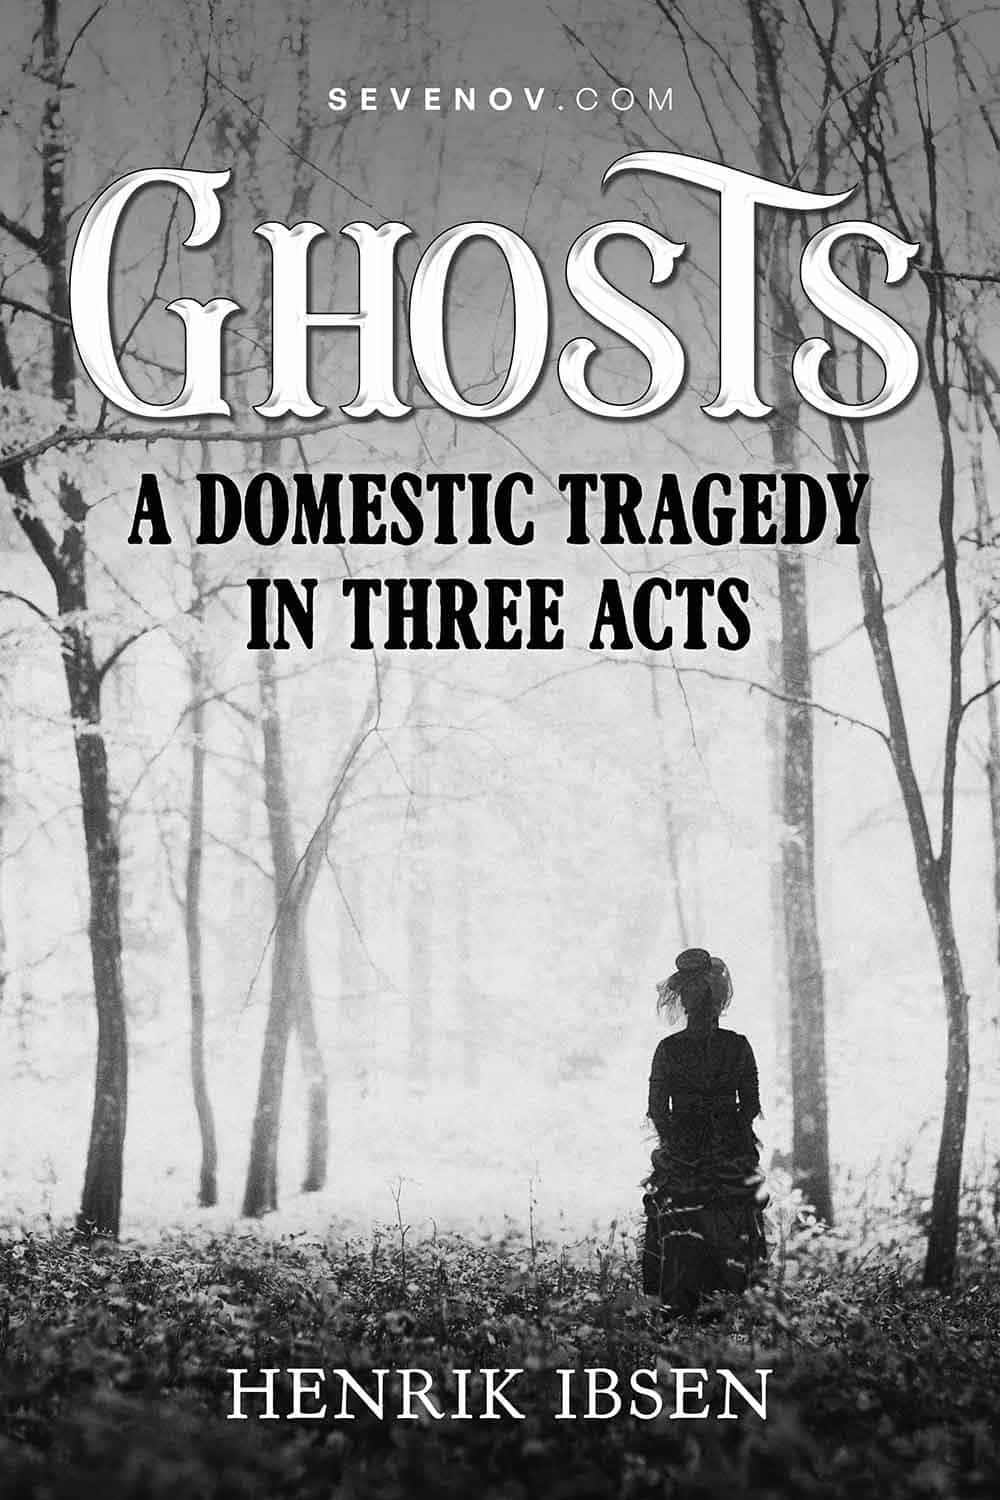 https://pagevio.com/wp-content/uploads/2022/12/ghosts-a-domestic-tragedy-in-three-acts-20220825.jpg